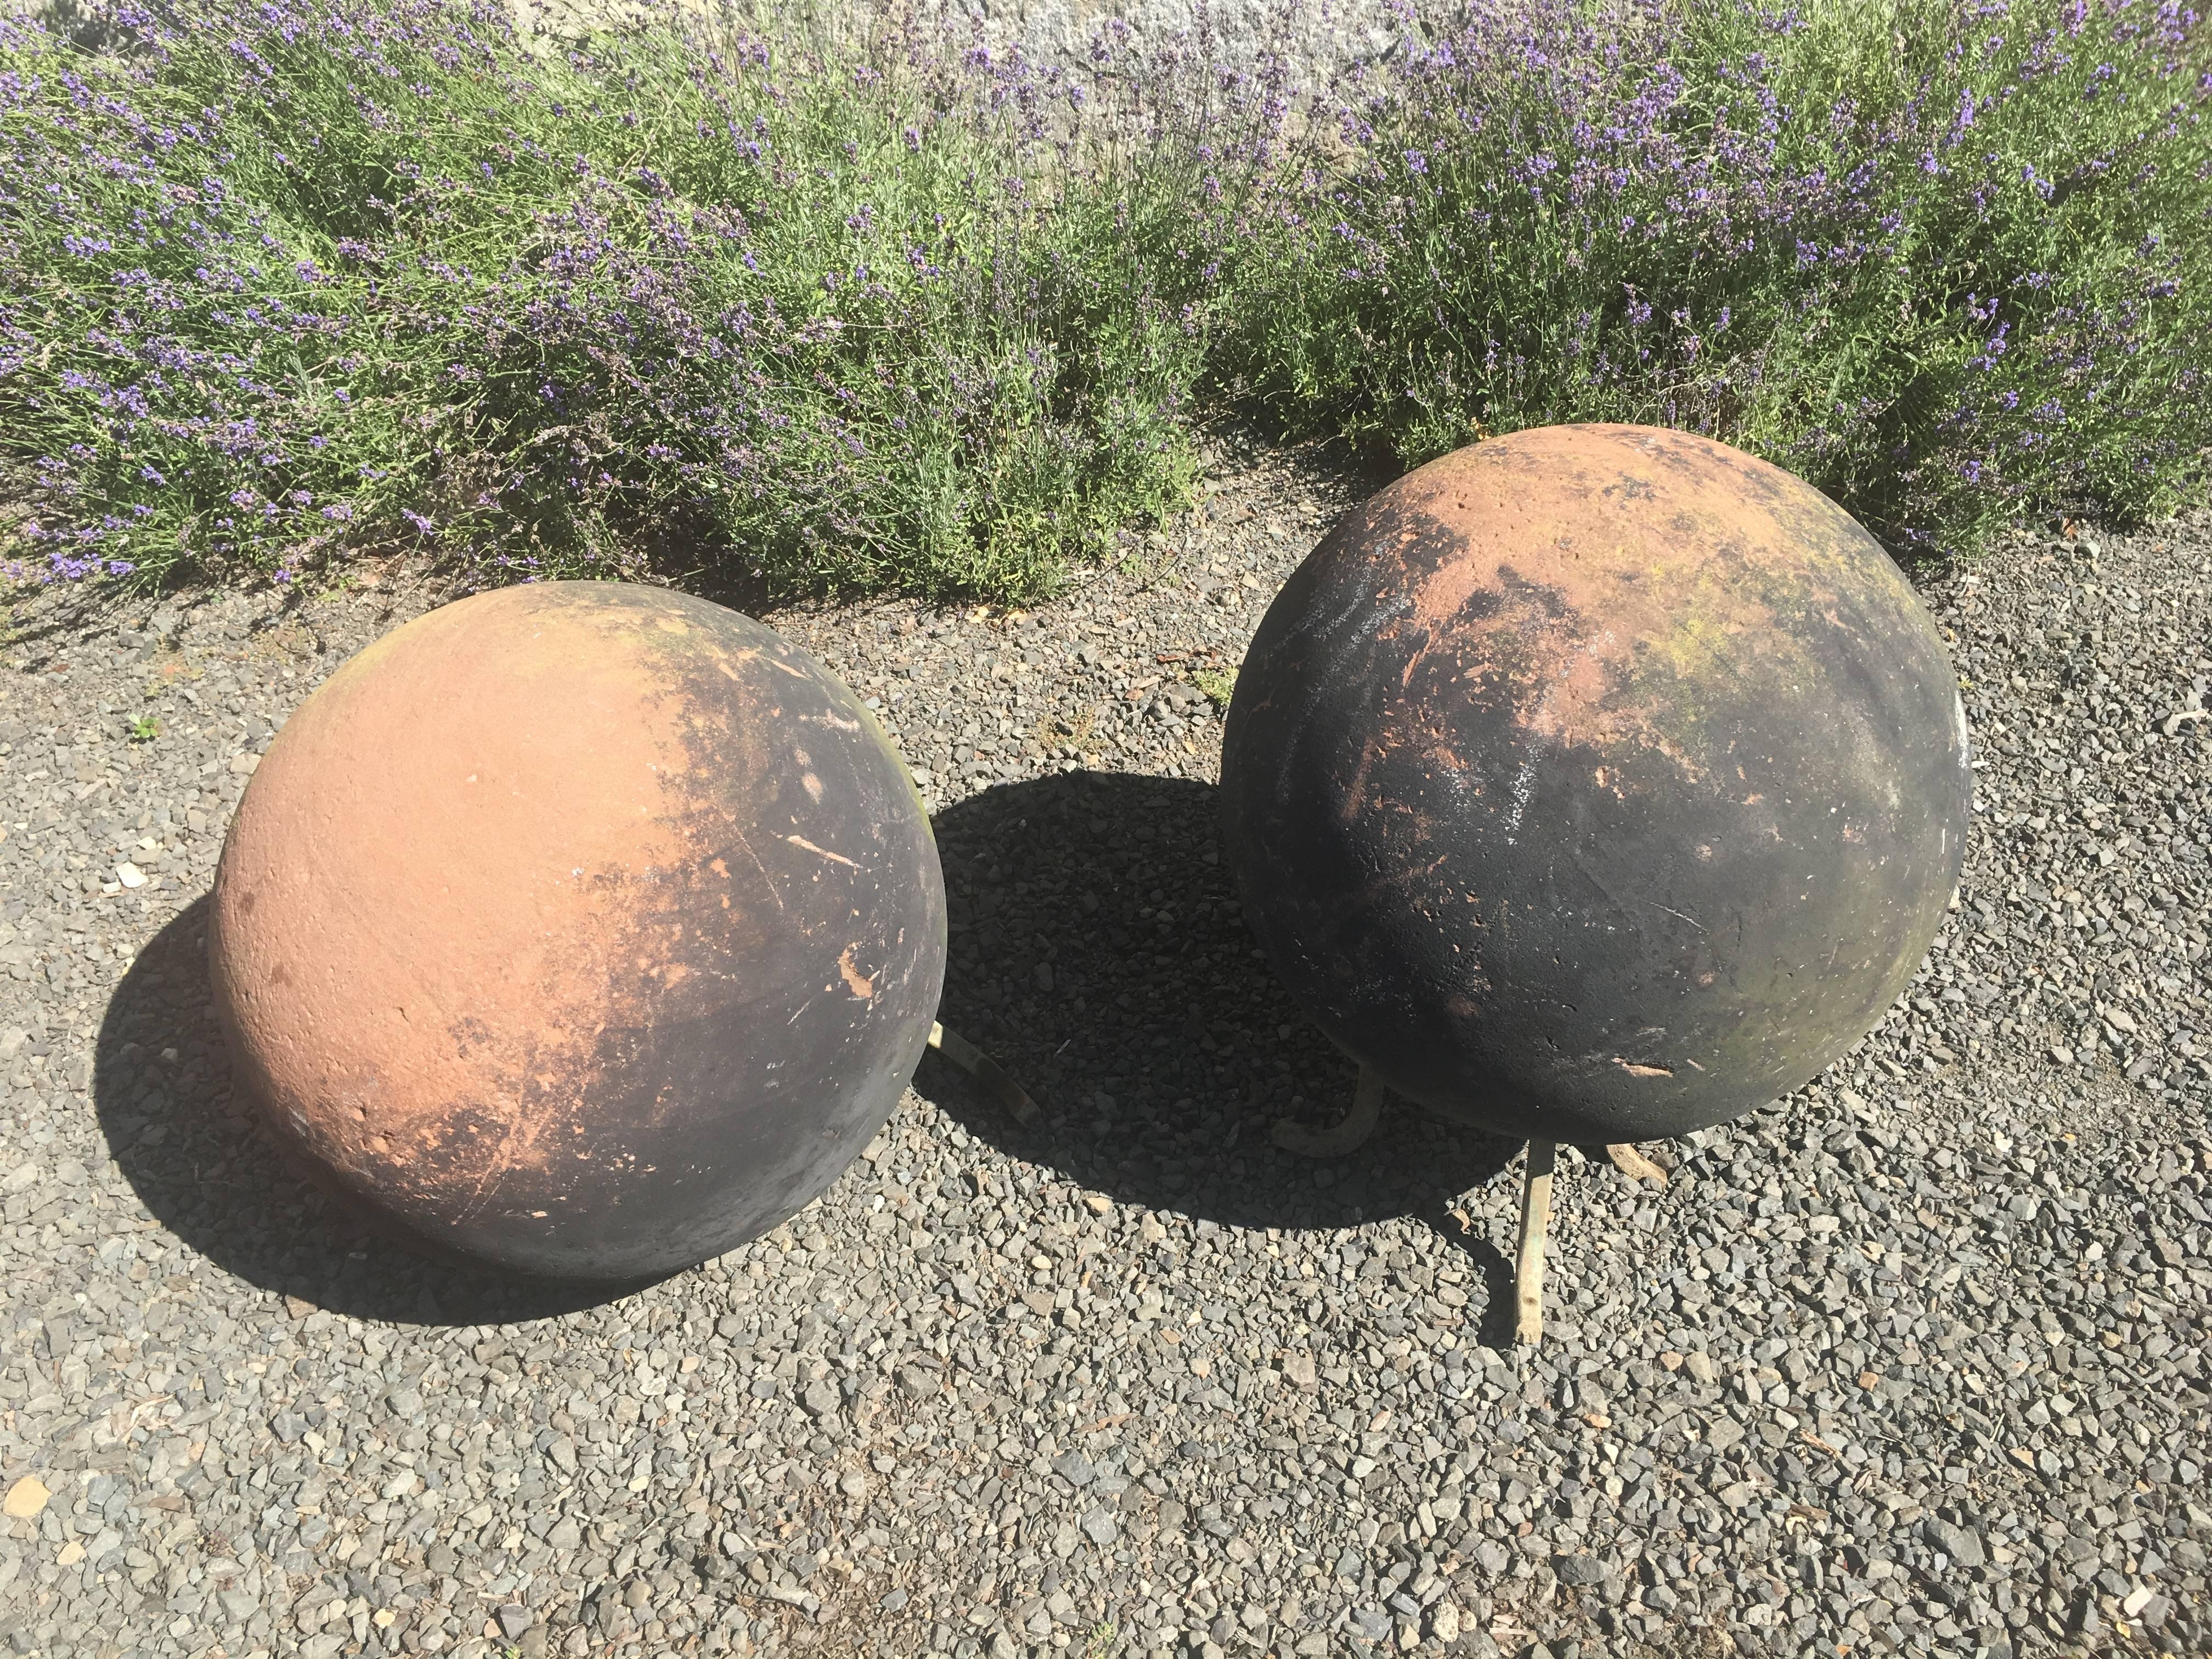 This magnificent and rare pair of very large hand-carved red sandstone balls has verdigris bronze feet. Over the years, they have developed an amazing patina that, to our eye, resembles the planet Jupiter, and the combination of blackened coal dust